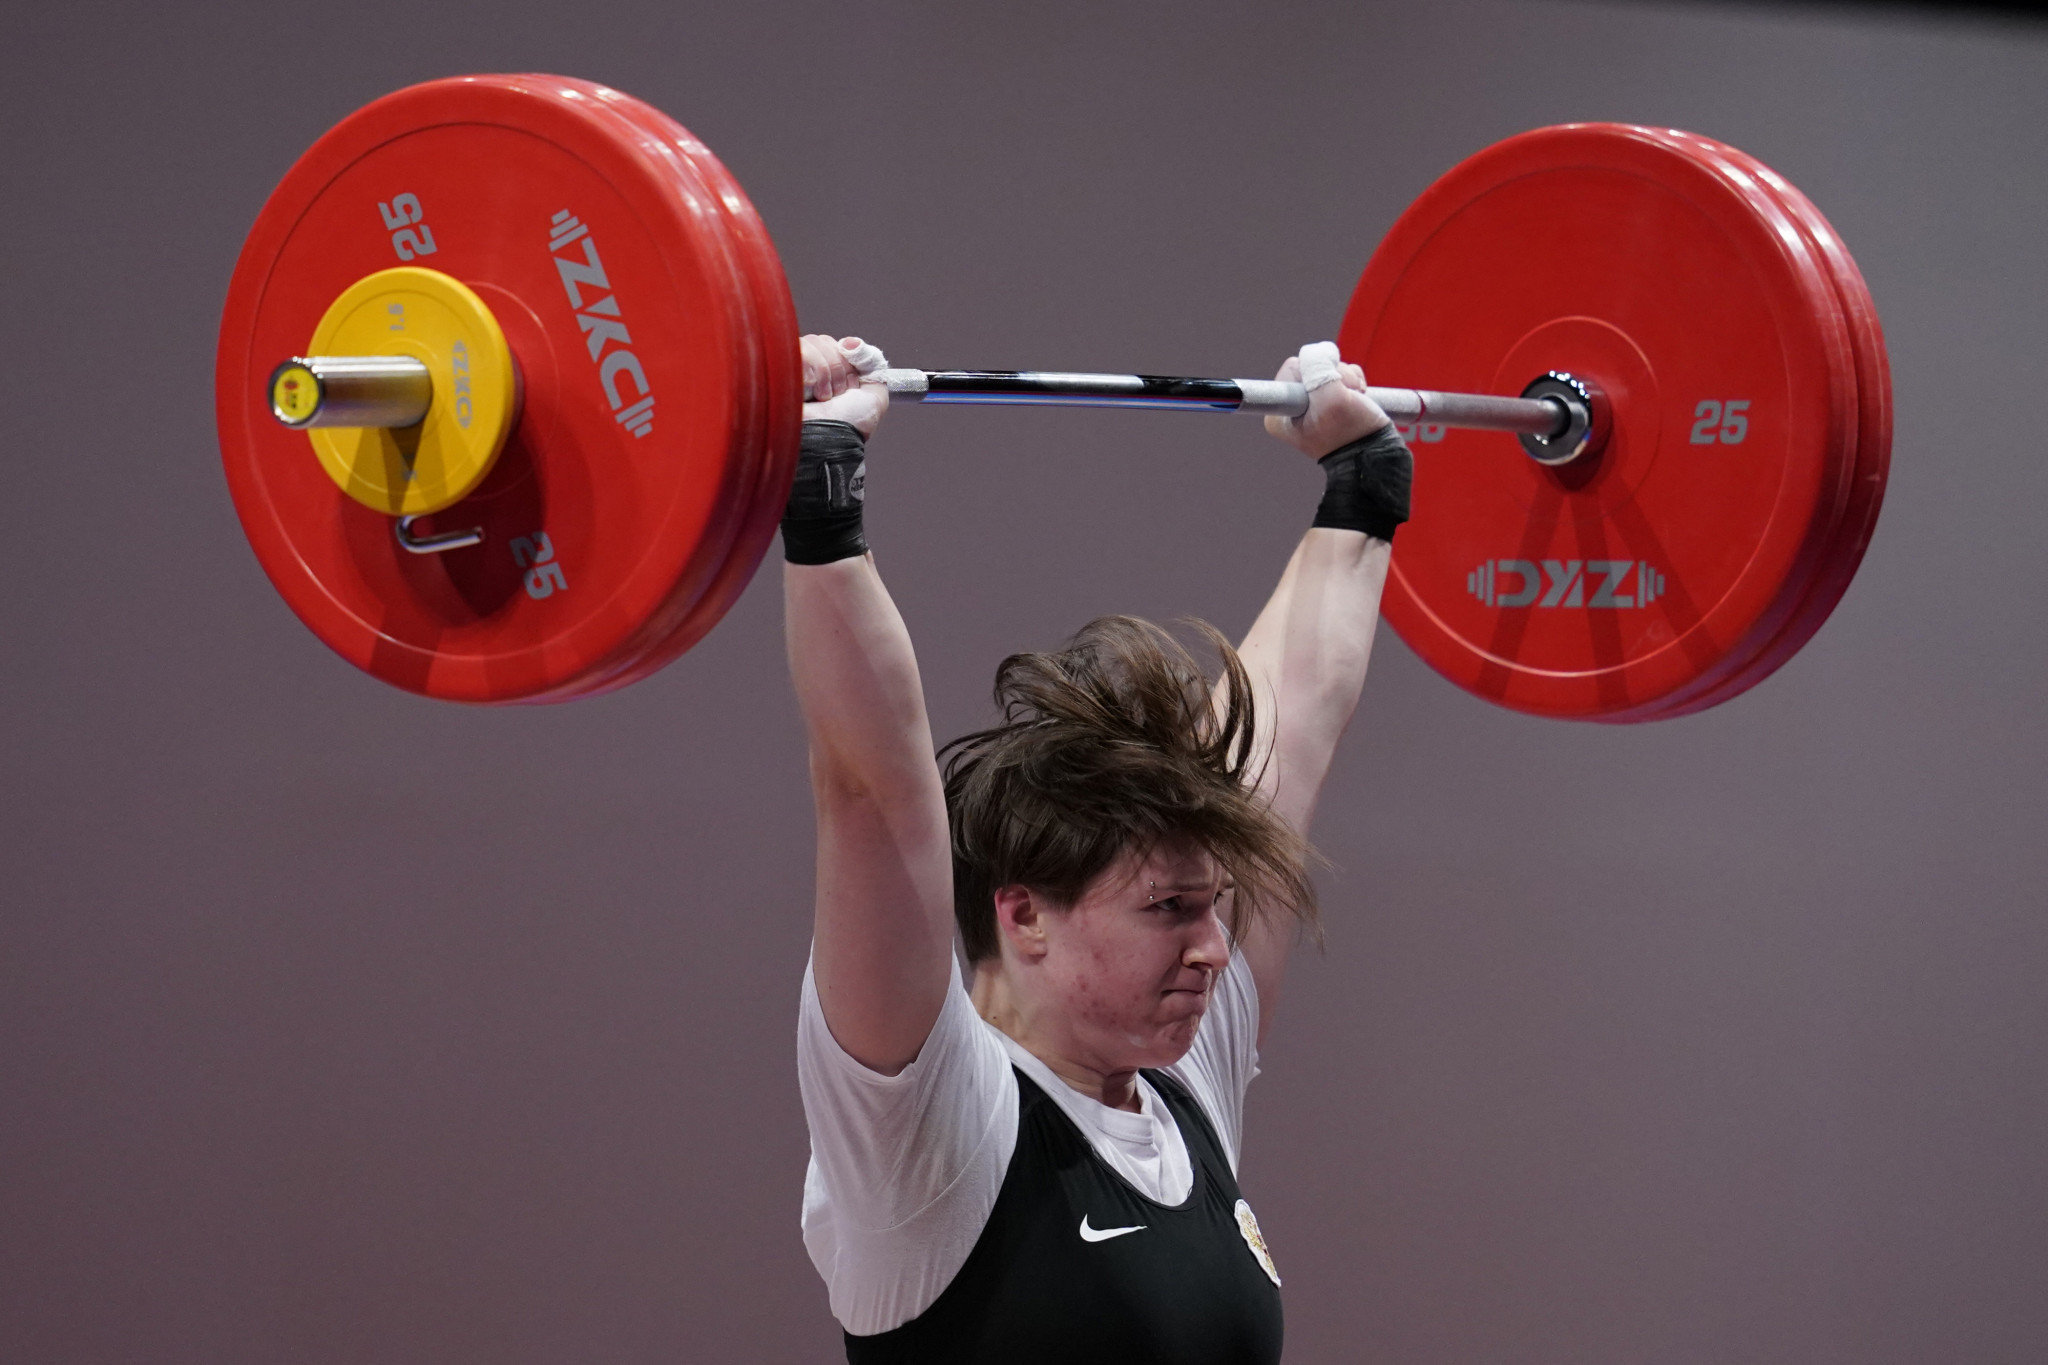 Organisers confirm strong interest in competing at European Weightlifting Championships despite coronavirus